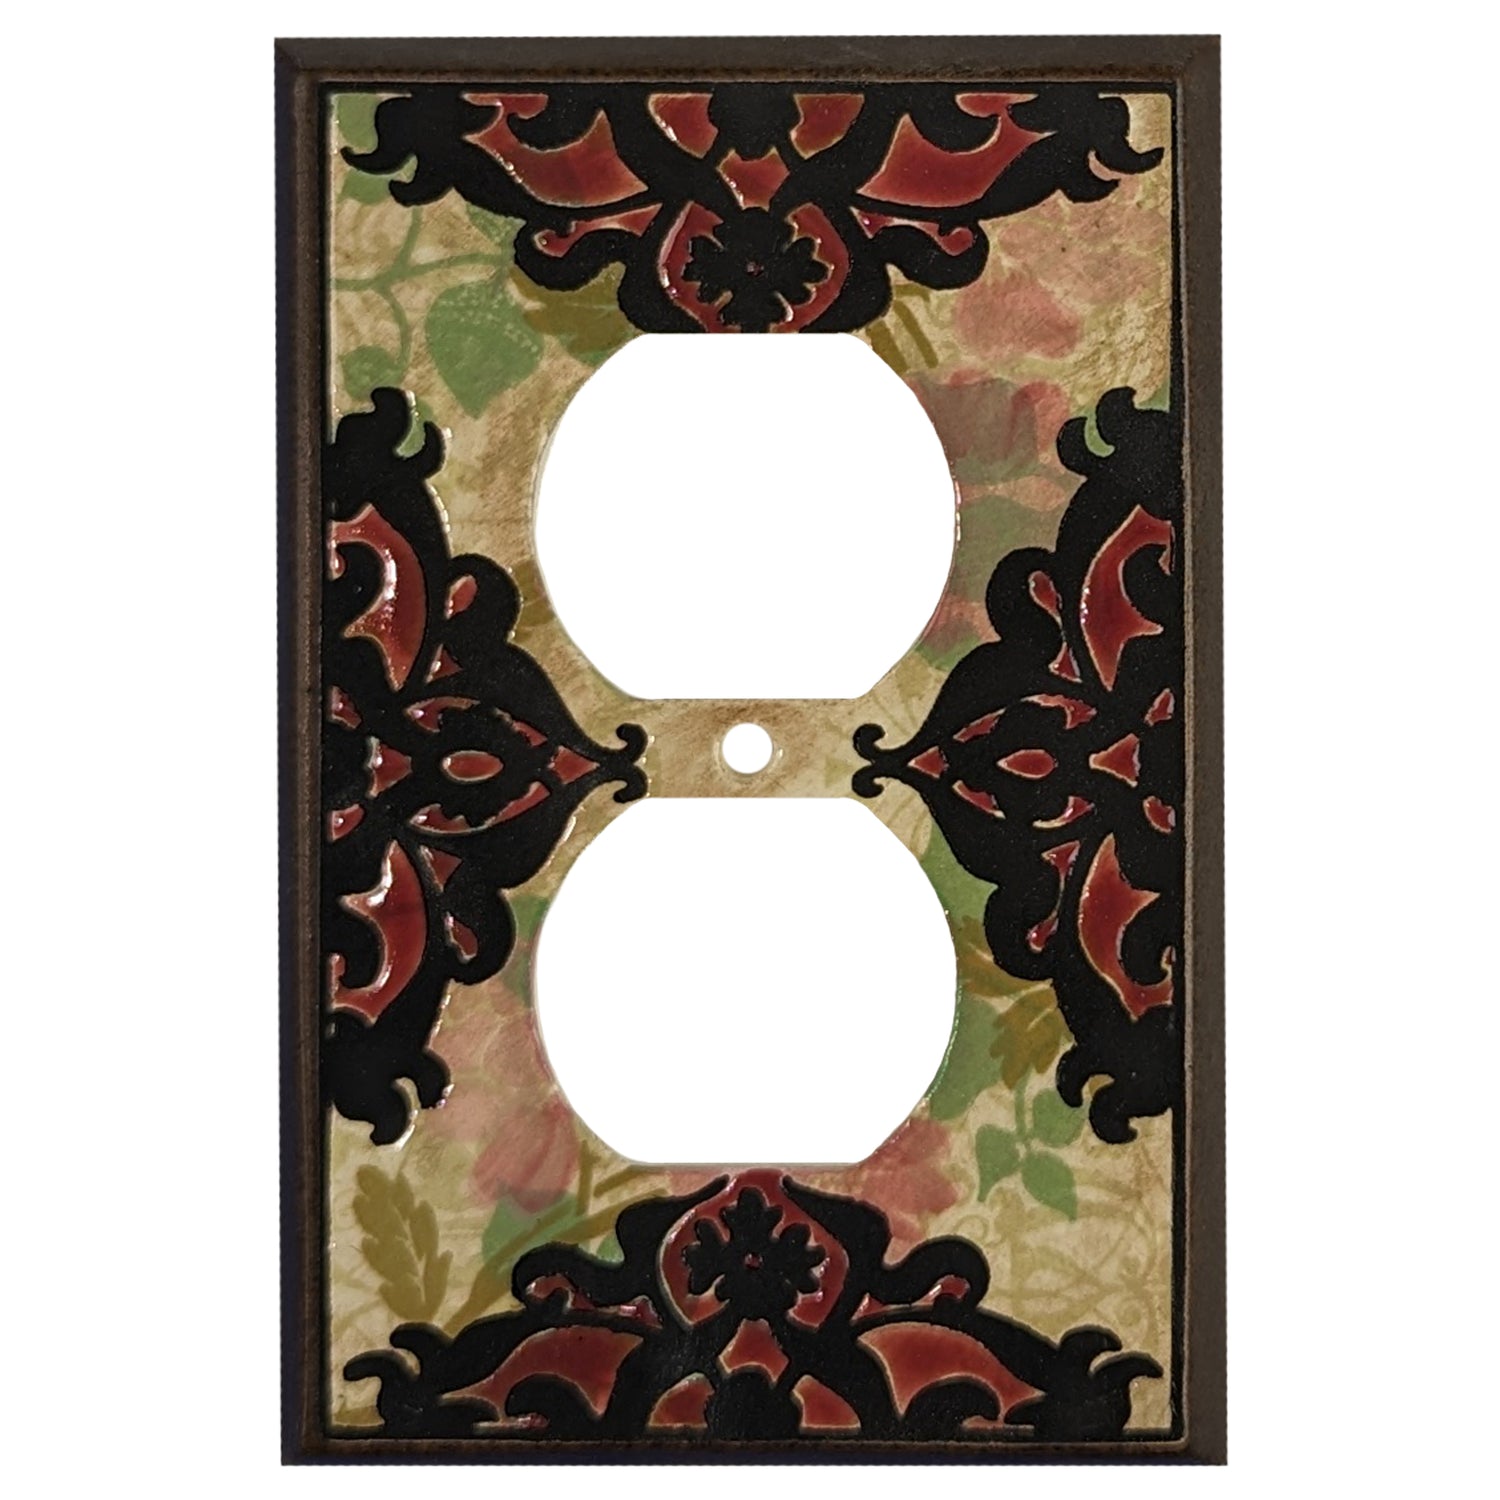 Lace - Brocade Cover Plates Duplex Outlet Wallplate